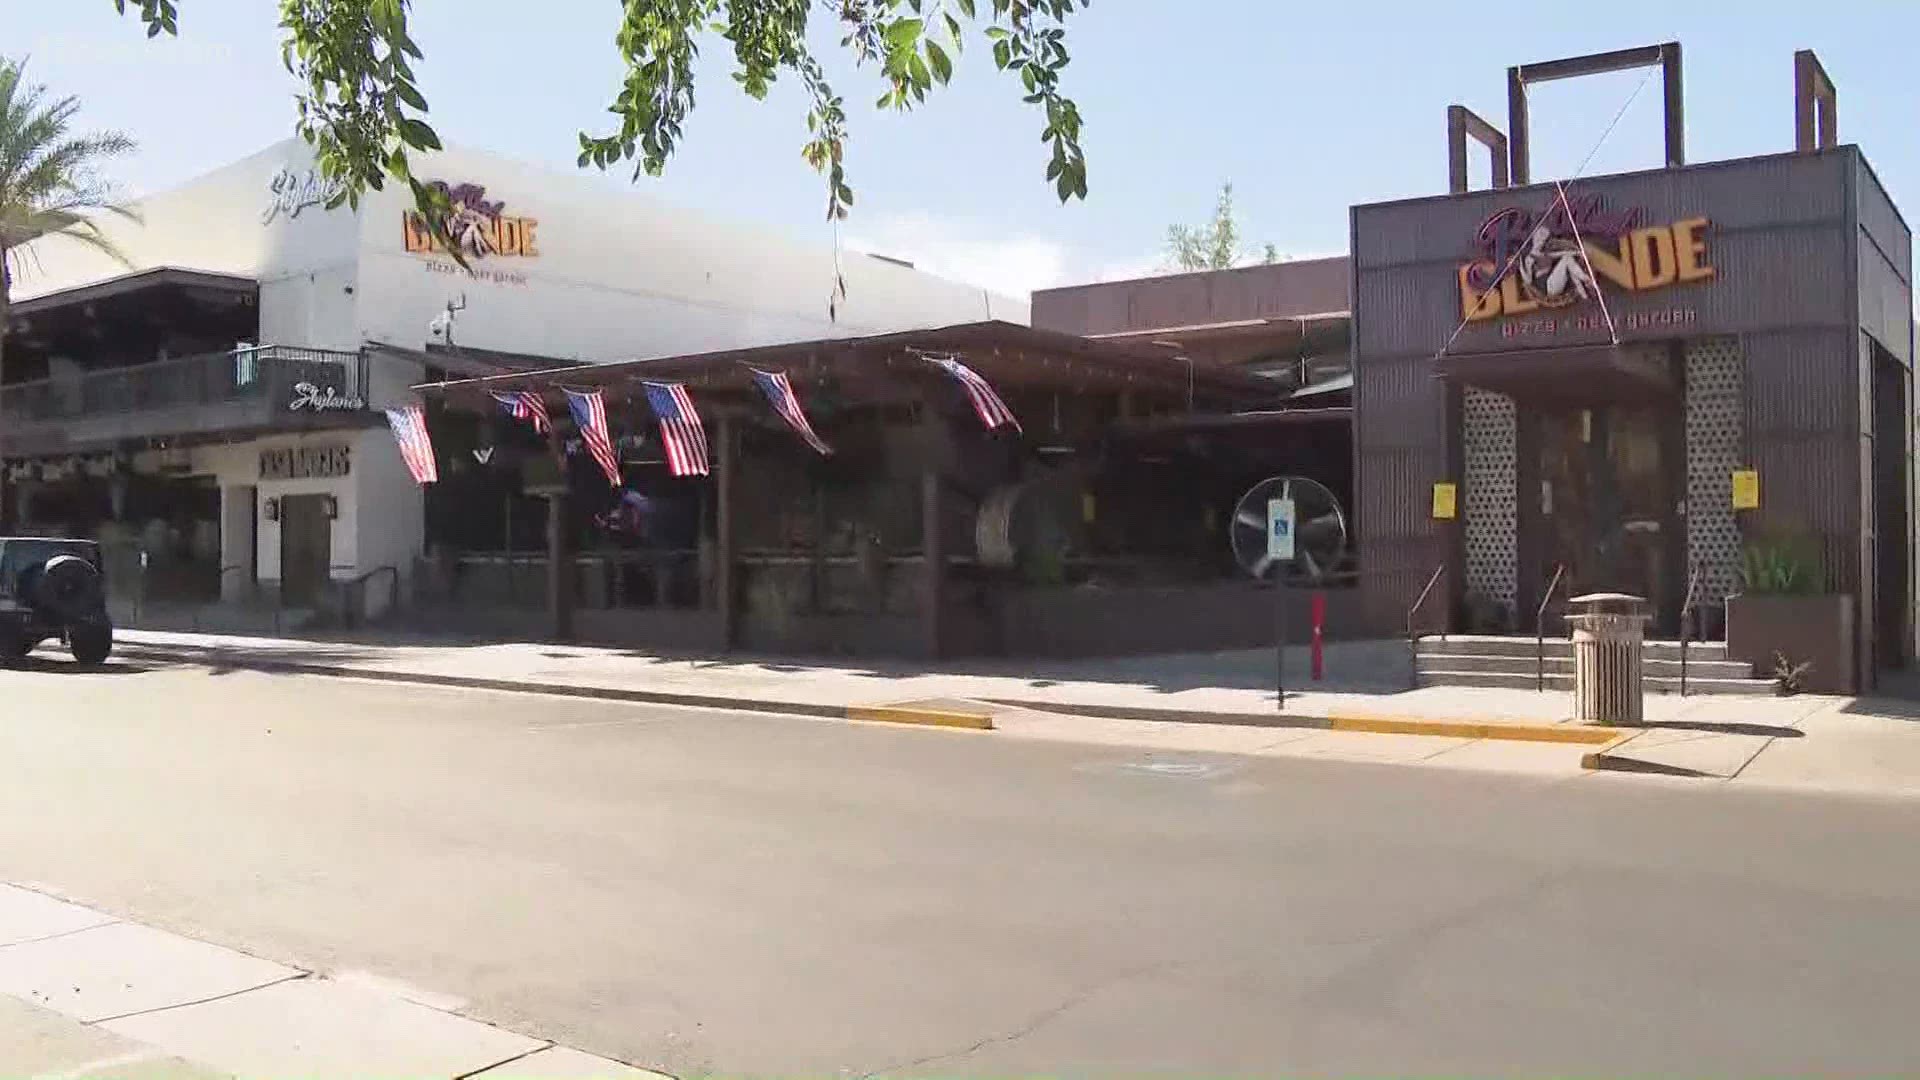 Arizona Gov. Doug Ducey announced the state will provide $2 million to help local restaurants, while Barstool Sports stepped in to help another Valley business.